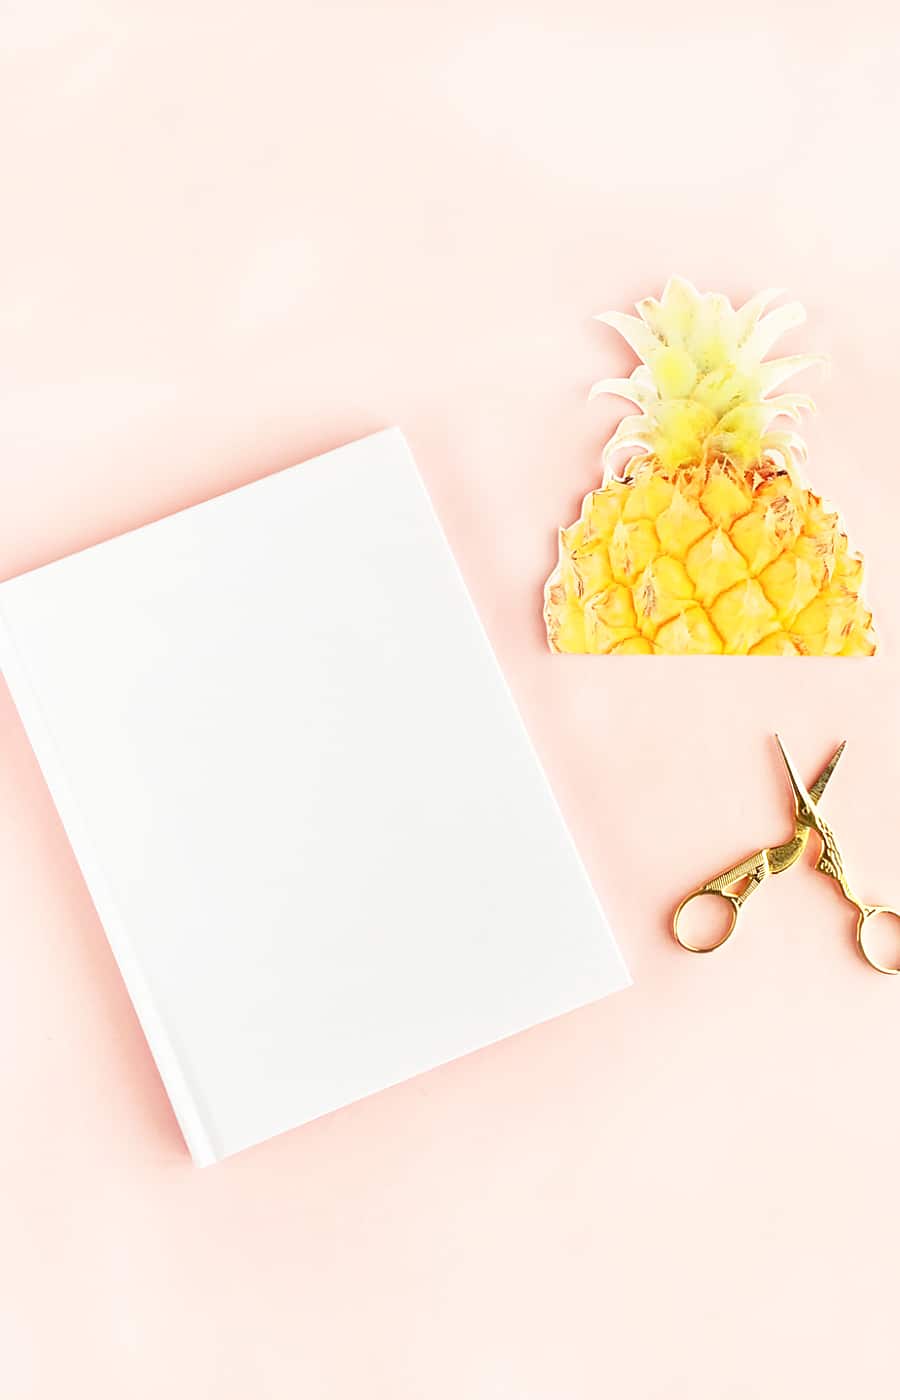 DIY Pineapple Notebook - Create your own tropical stationery with this tutorial using printable temporary tattoo paper. Click through for the how-to!